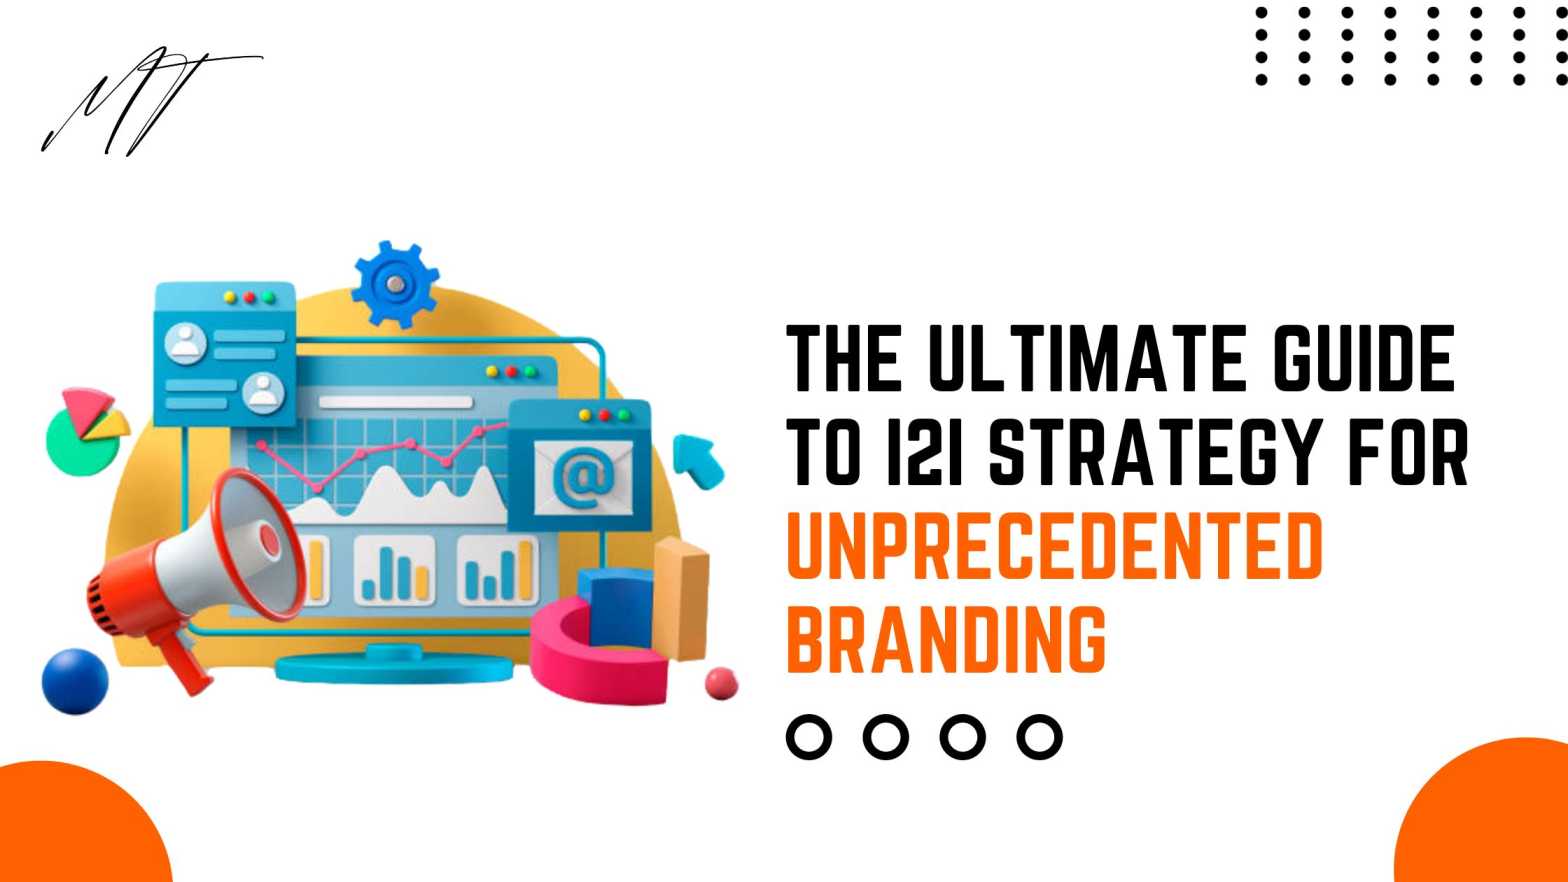 The Ultimate Guide to I2I Strategy for Unprecedented Branding